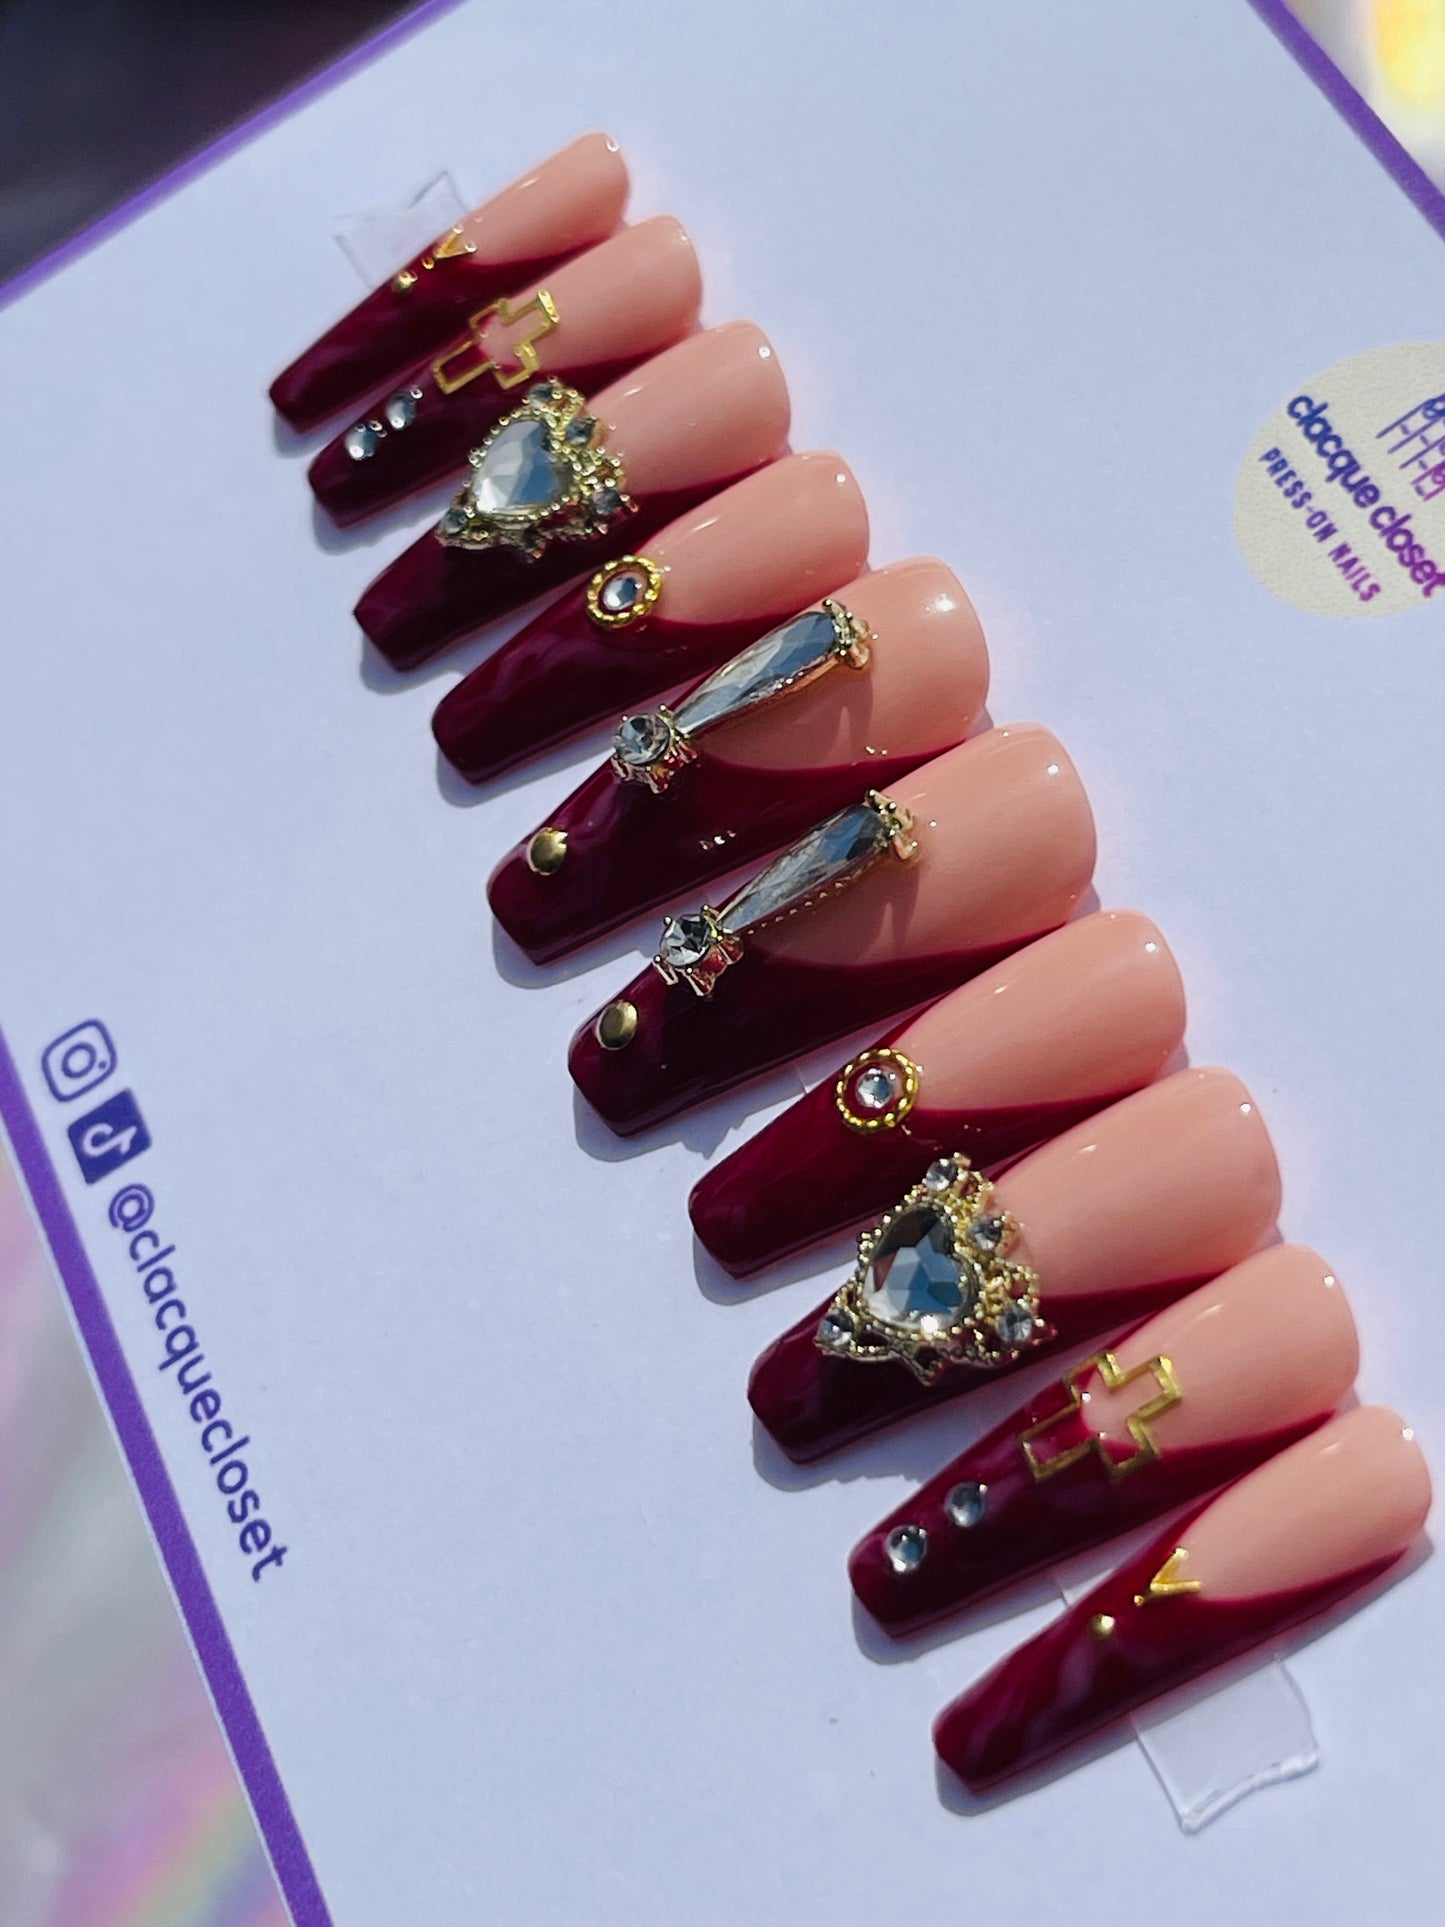 Long coffin-shaped nails with a red marble effect and classic French tips, enhanced with bold rhinestone embellishments and gold accents for a dramatic and luxurious appearance.